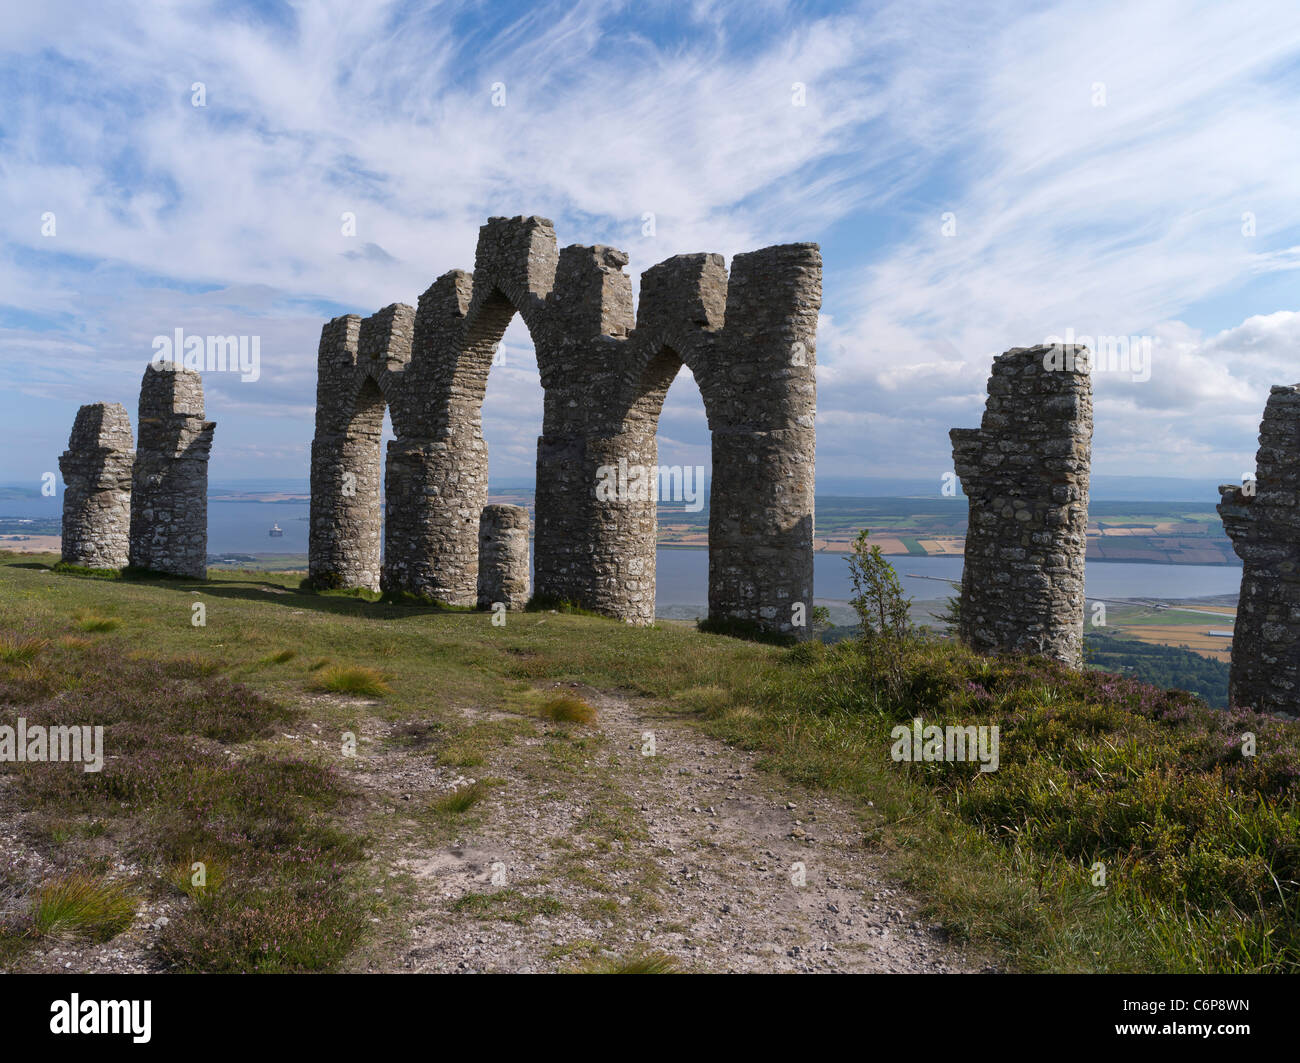 dh  FYRISH HILL ROSS CROMARTY Fyrish Hill Monument built by Sir Hector Munro scotland cnoc viewpoint shire Stock Photo